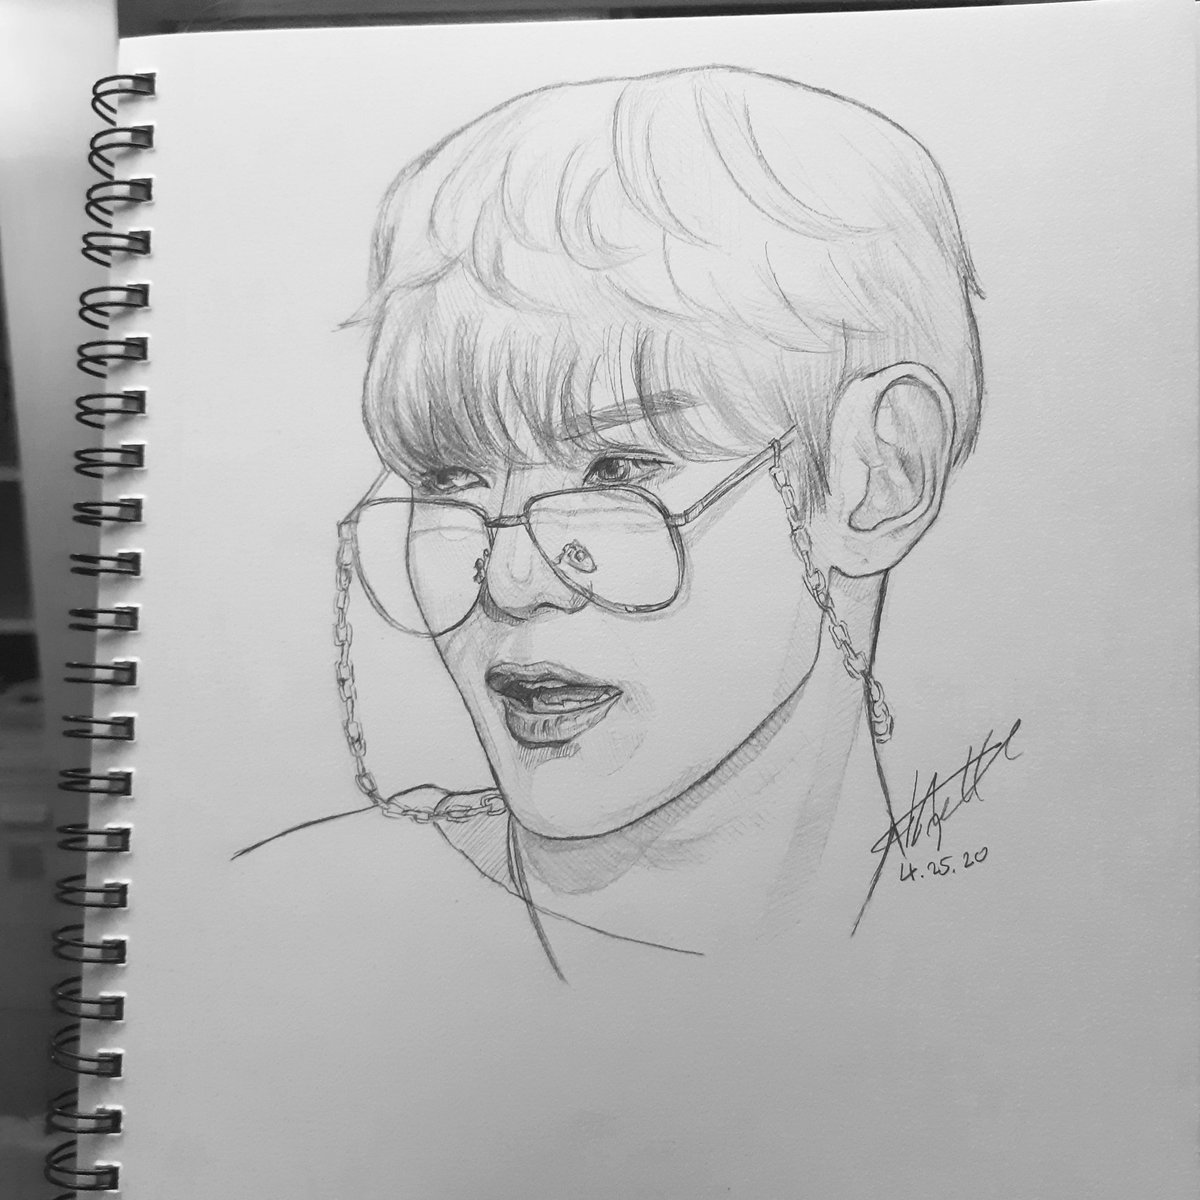  #sixfanarts I drew yeosang today :) Ahaha idk if i should continue...I'll prob just end it here, i would prob still draw them but not post it here #ATEEZ  #yeosang  #ATEEZfanart  #kpopfanart  #fanart